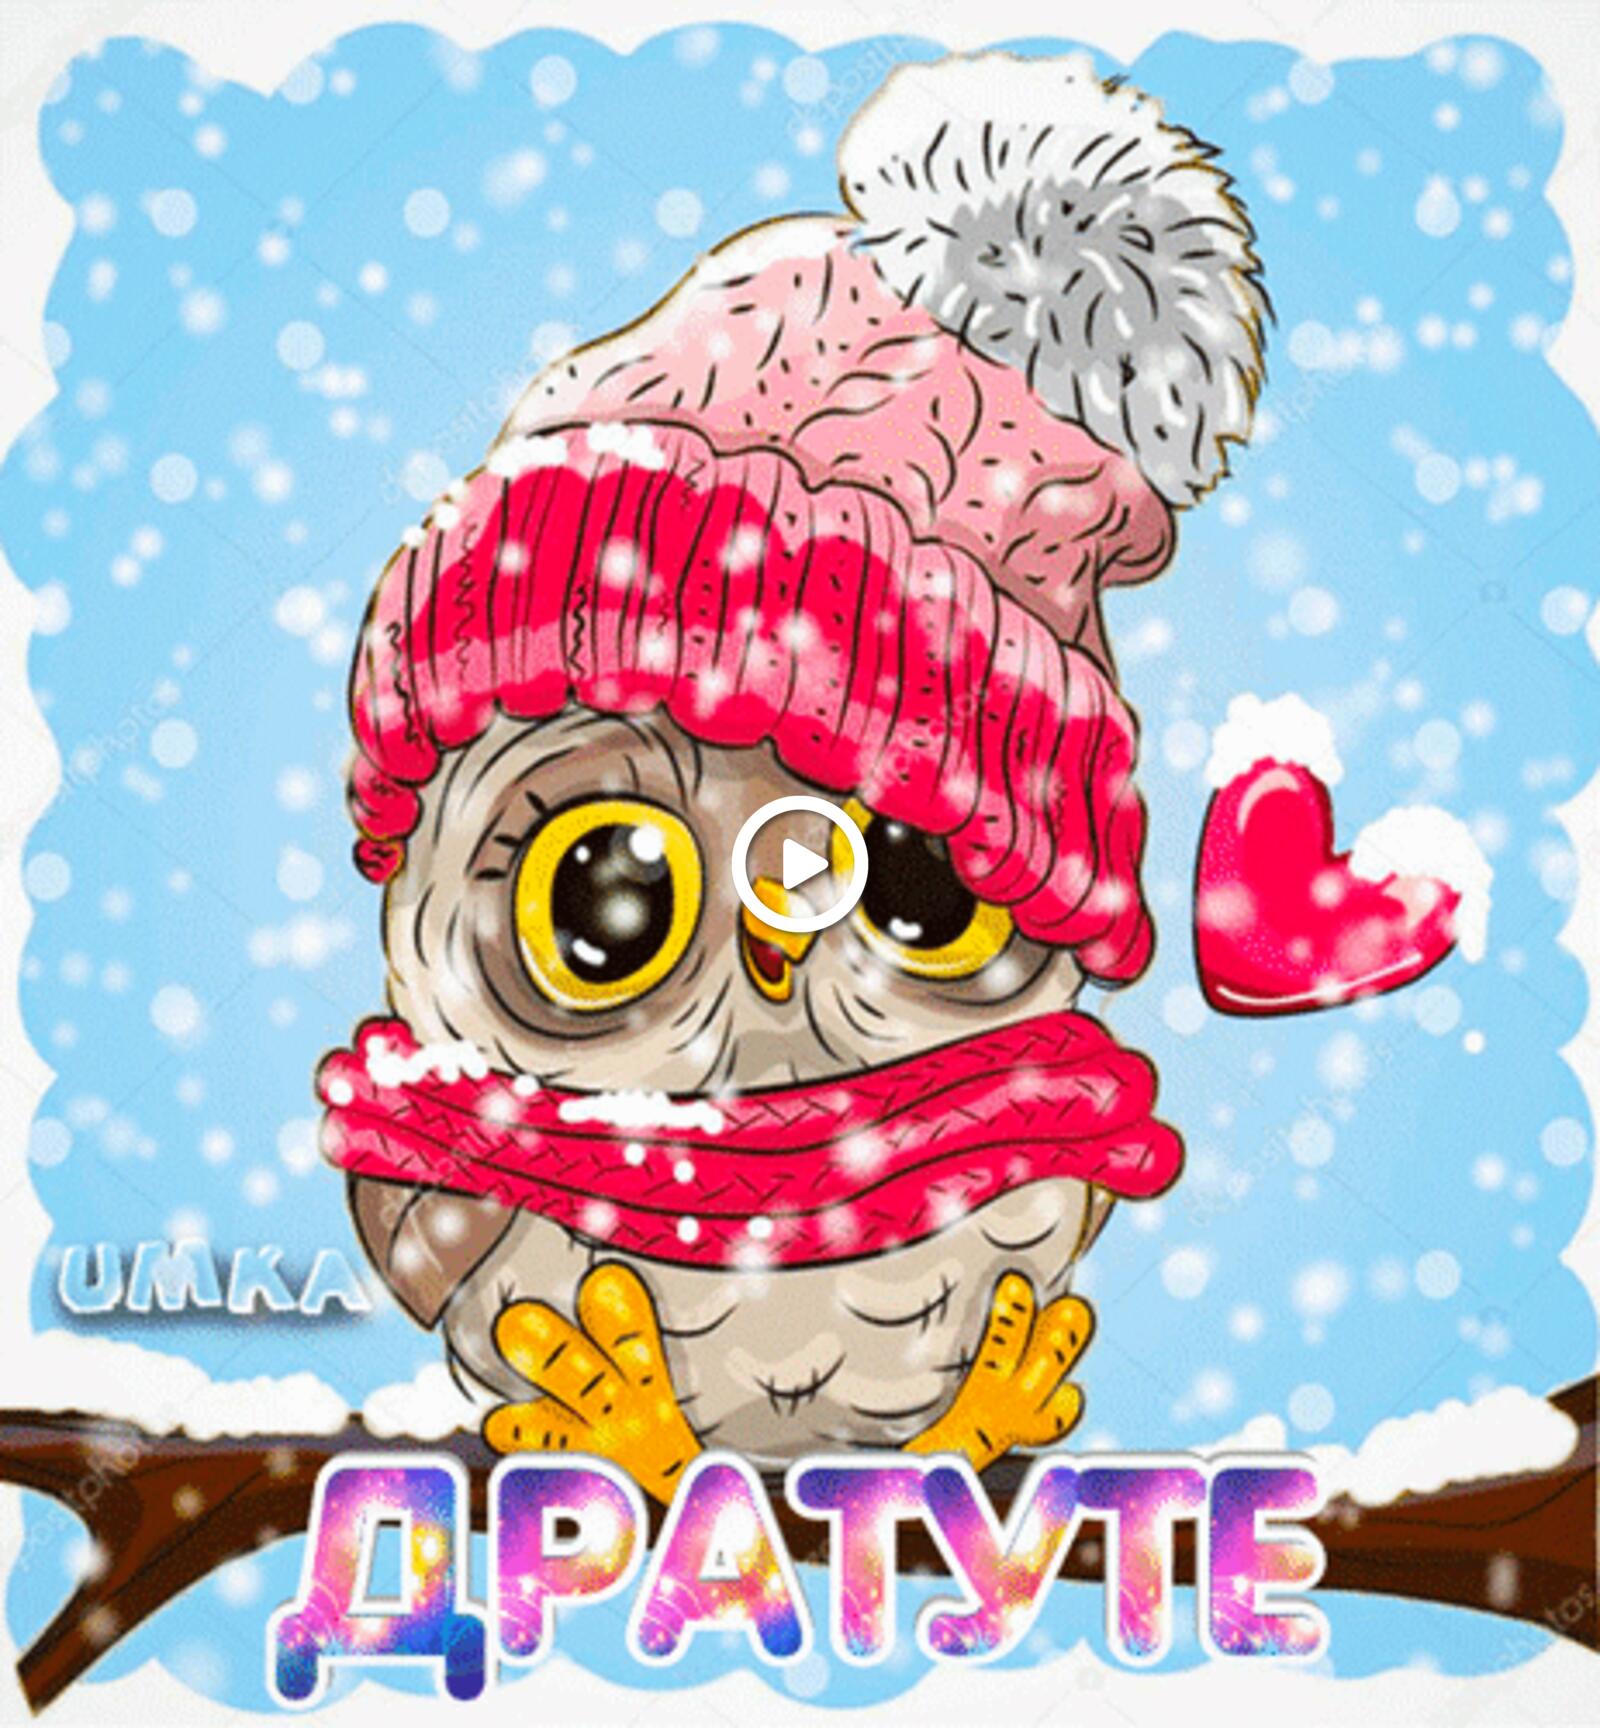 A postcard on the subject of winter owl hello for free